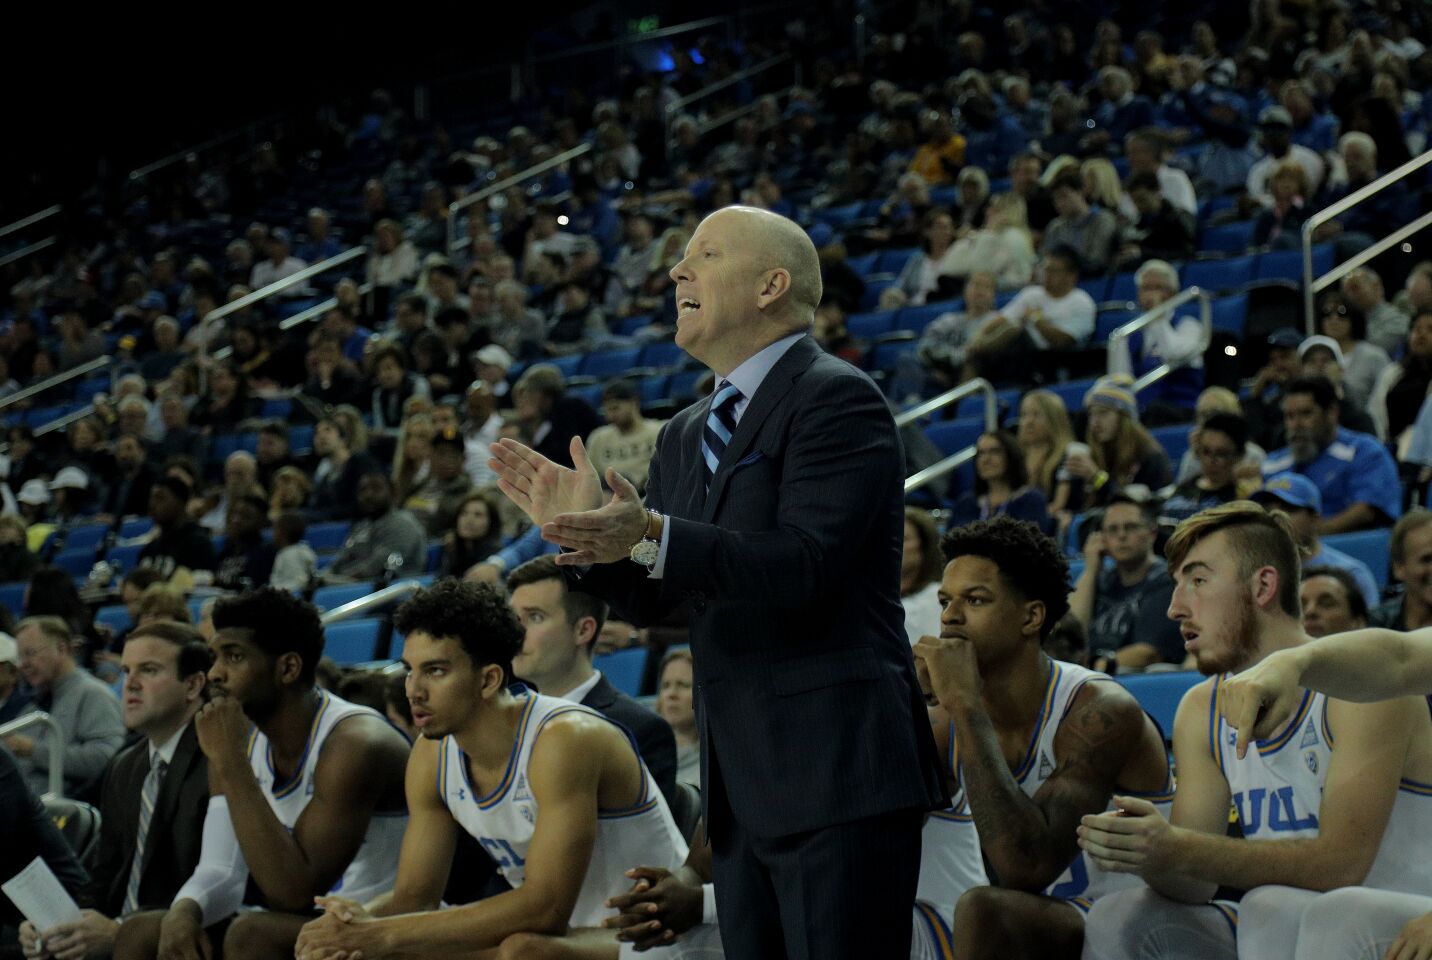 UCLA coach Mick Cronin calls out a play during the Bruins' game against Cal State Fullerton.